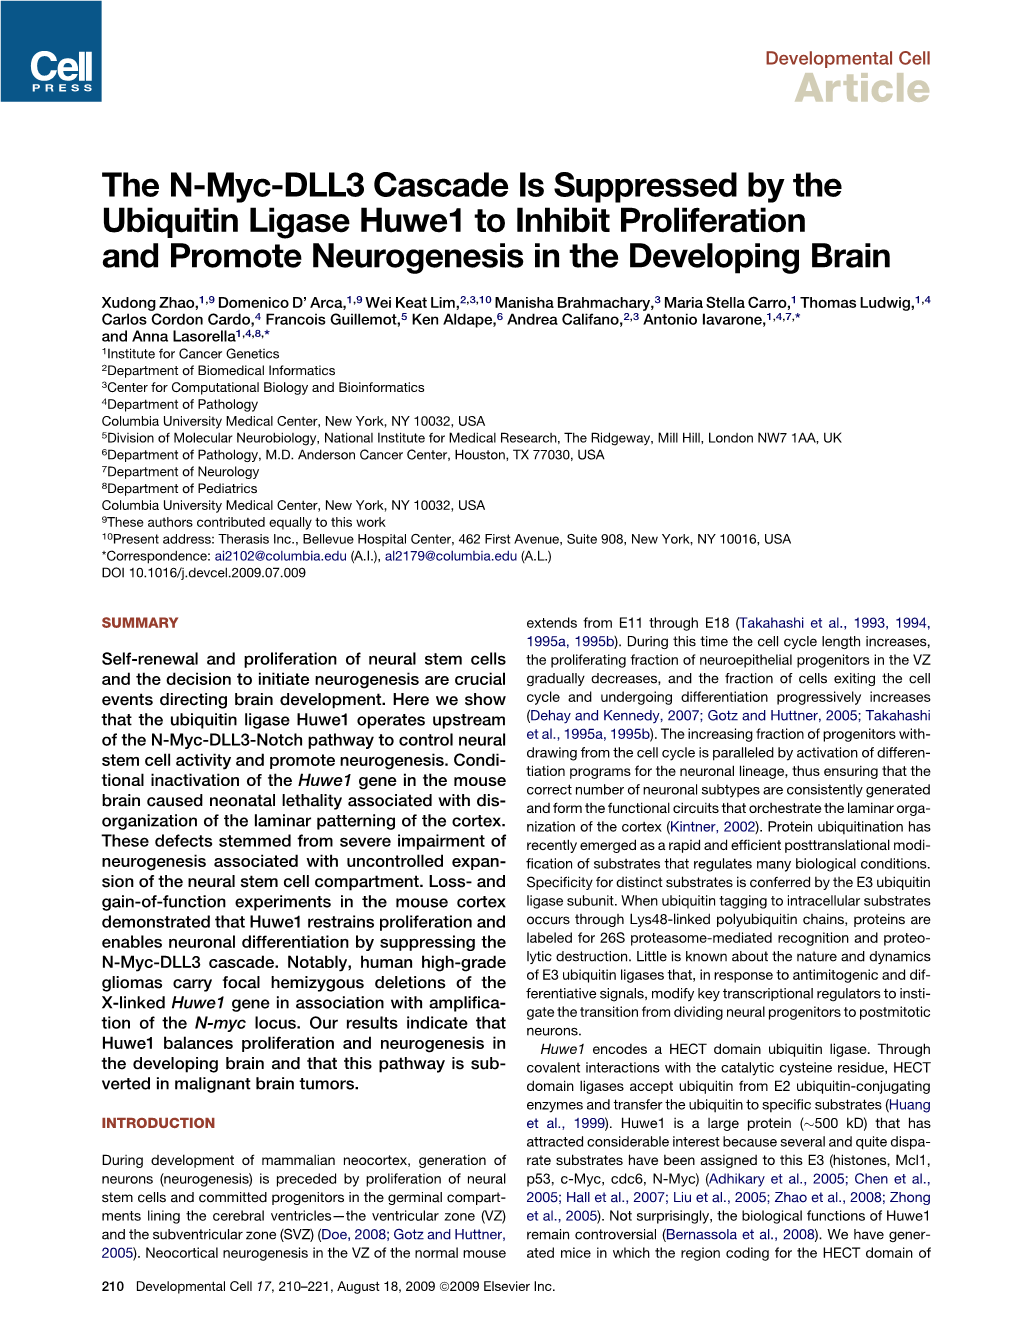 The N-Myc-DLL3 Cascade Is Suppressed by the Ubiquitin Ligase Huwe1 to Inhibit Proliferation and Promote Neurogenesis in the Developing Brain